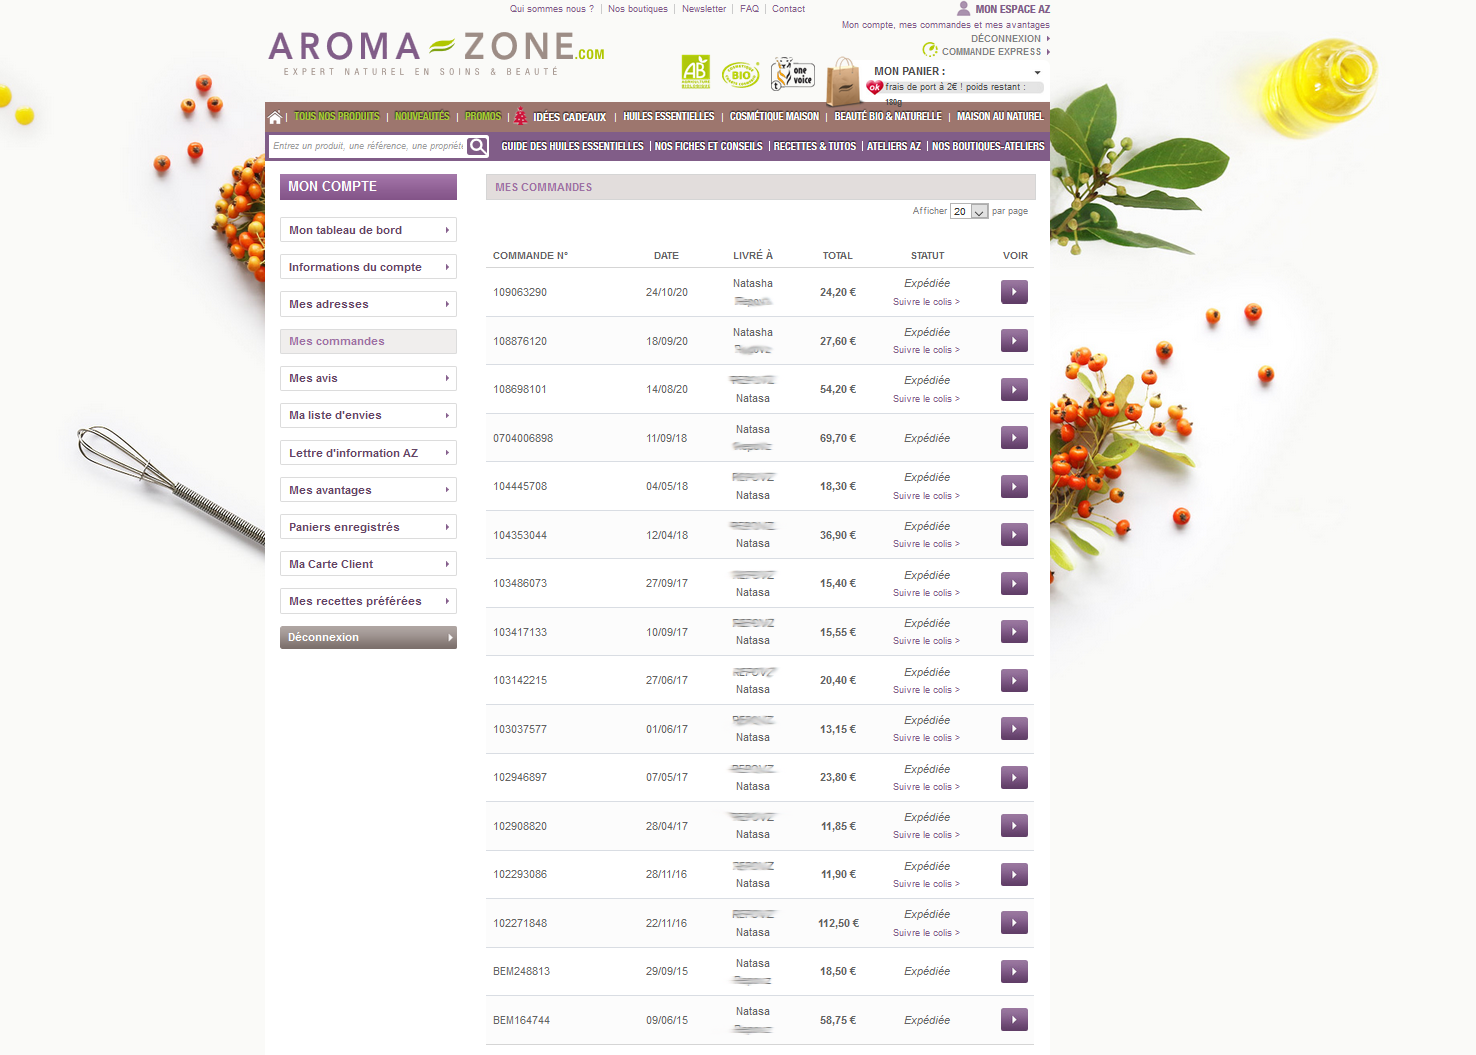 Aroma Zone review all my online orders from Aromazone.